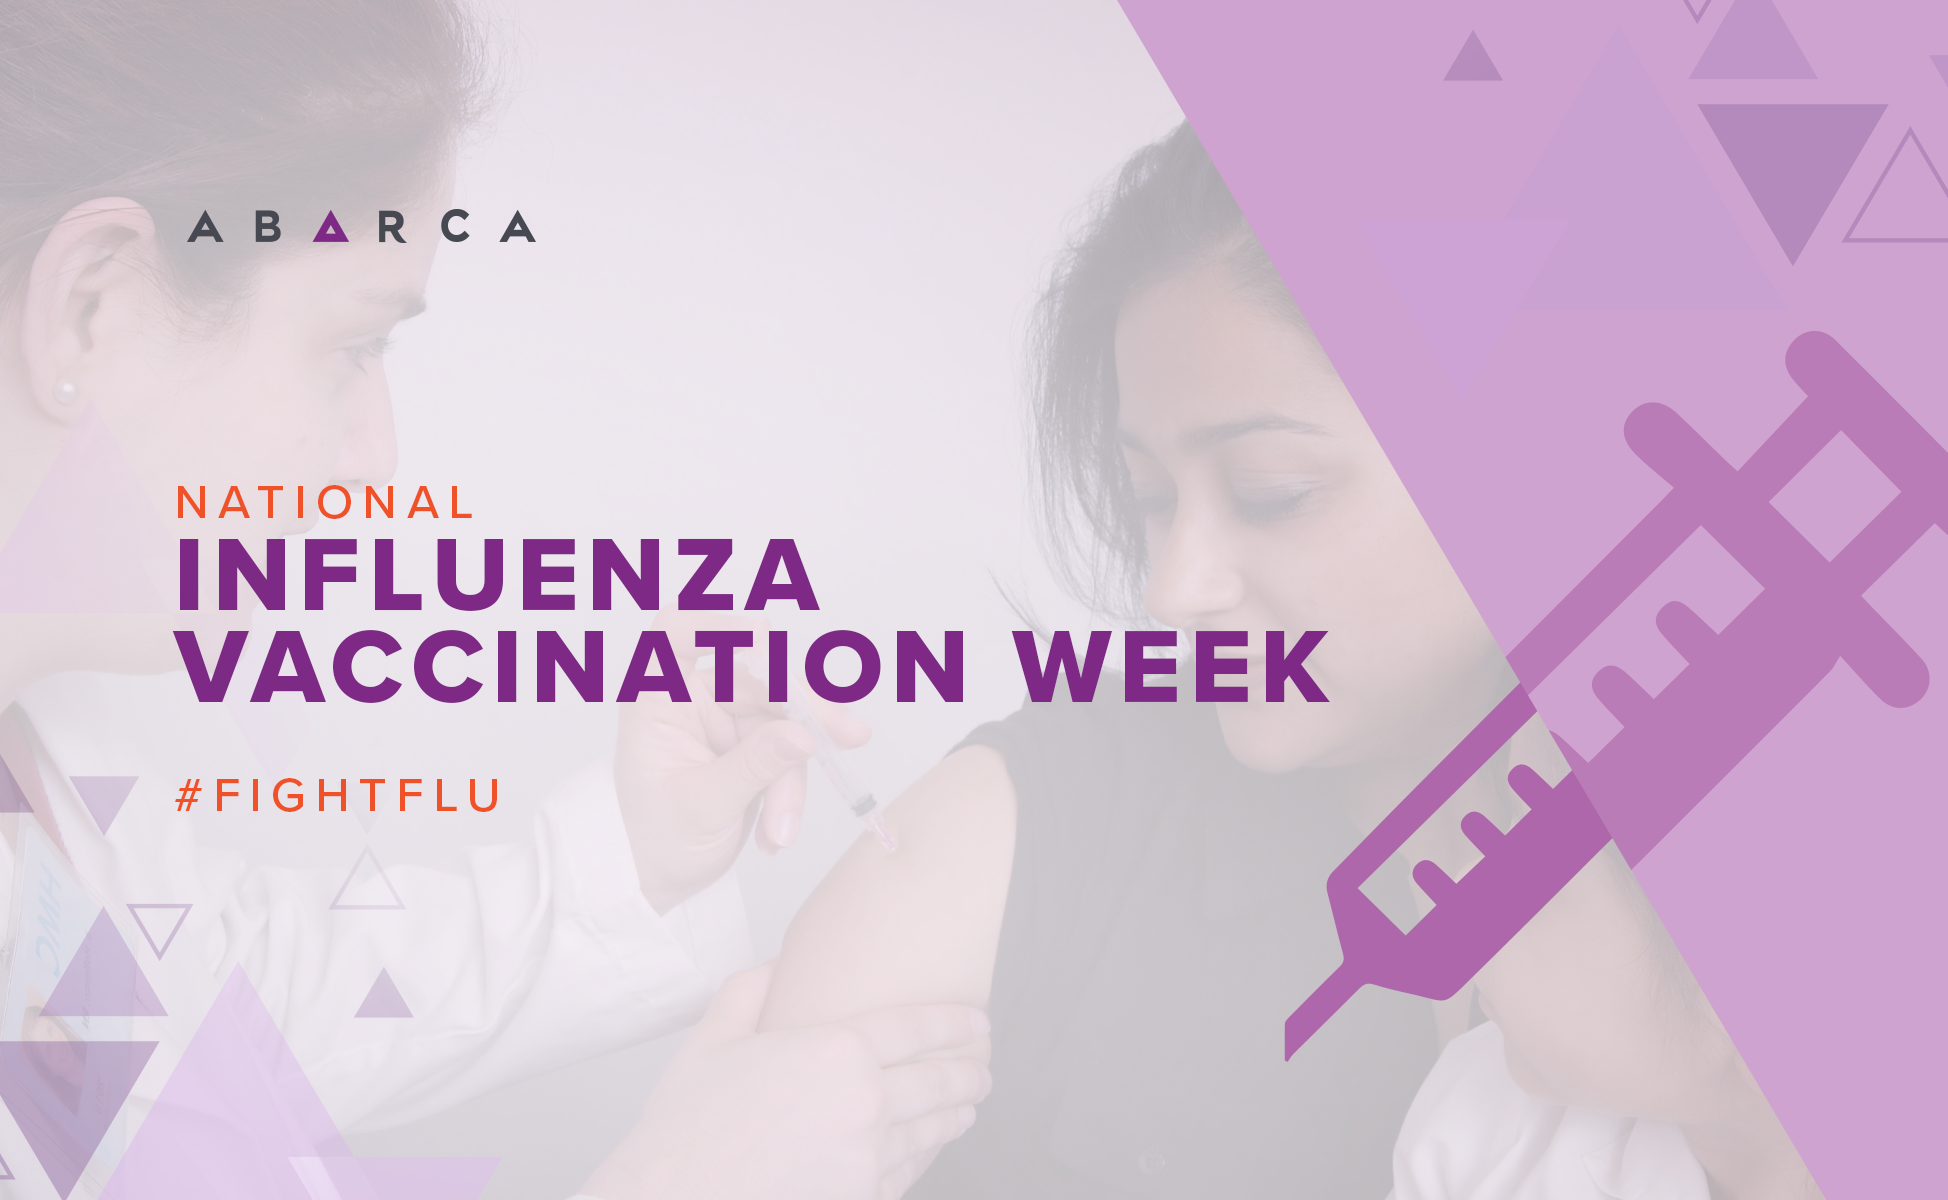 Abarca Health spreads the word on the benefits of the flu vaccination in times of Covid-19